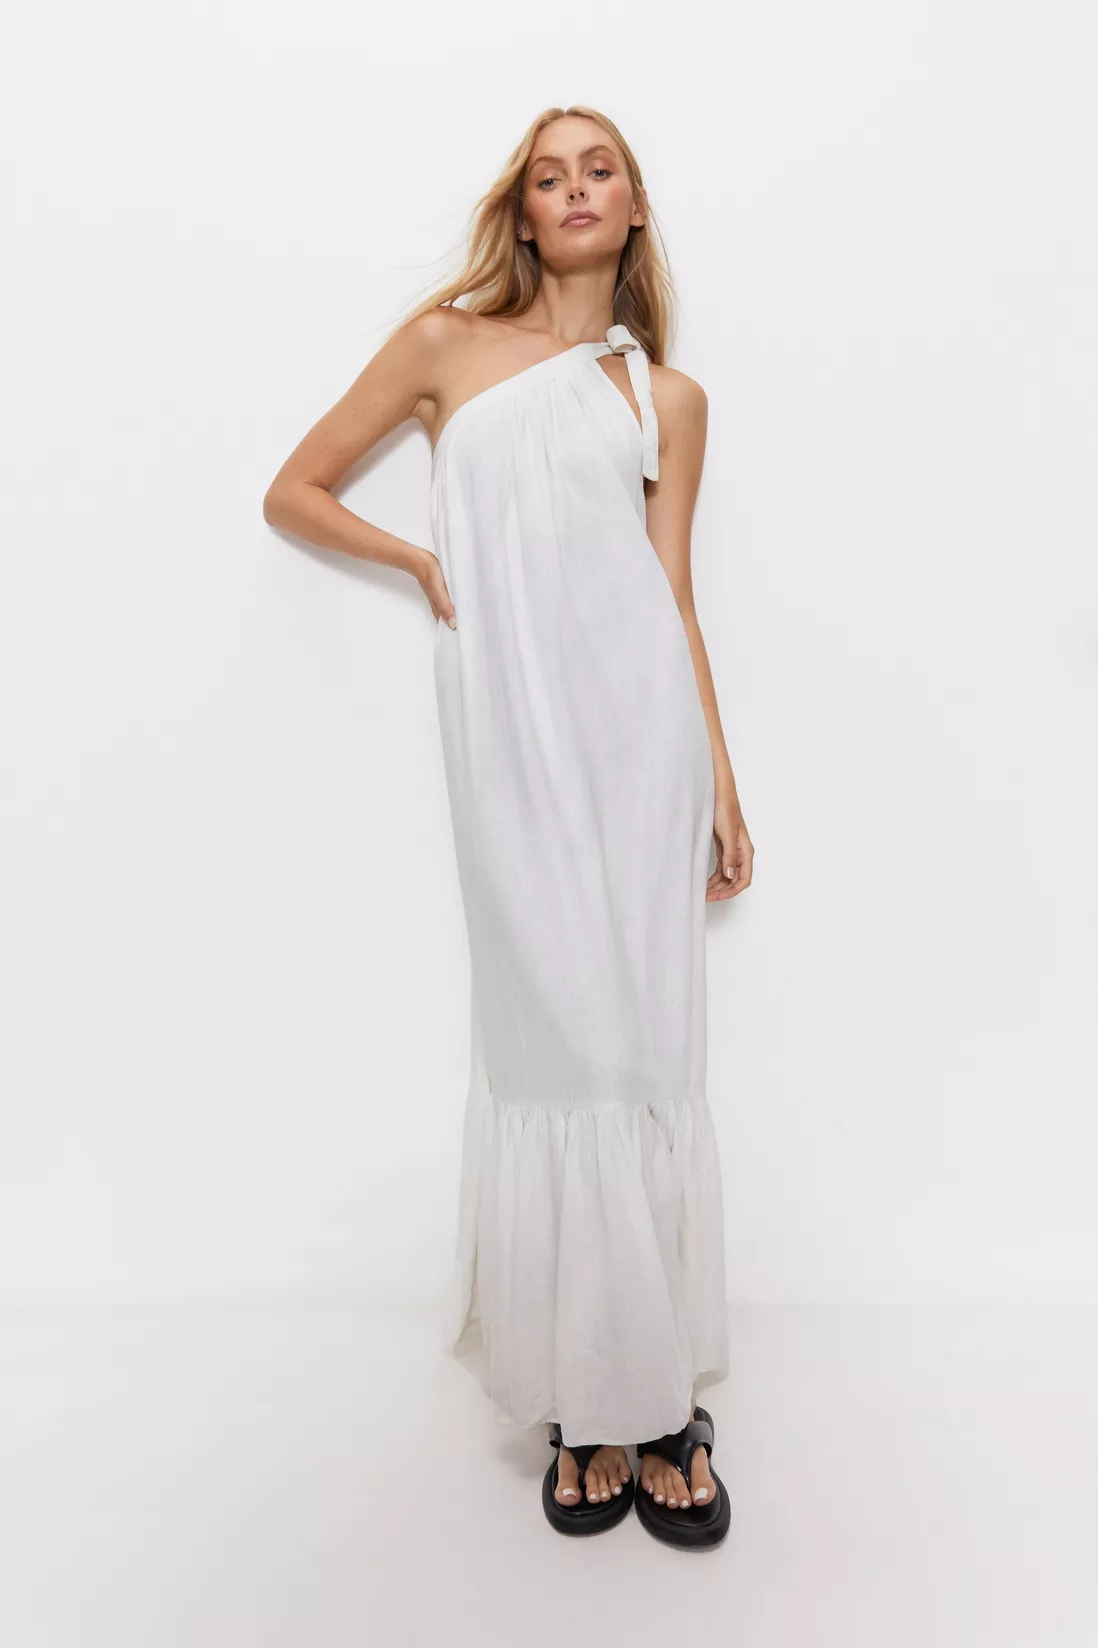 Discover the elegance and versatility of white linen dresses. From midi to maxi, strapless to tiered, explore the best styles for summer outings, elegant dinners, and casual chic days. White Linen Dress Outfit | White Linen Dresses For Summer | White Linen Dresses With Sleeves | Wite Linen Dresses For Sale | White Linen Dress With Pockets | White Linen Dresses For Ladies | Linen Dress Short | White Linen Dress Sleeveless | White Linen Dress Long | White Linen Dress Mini | White Summer Dress